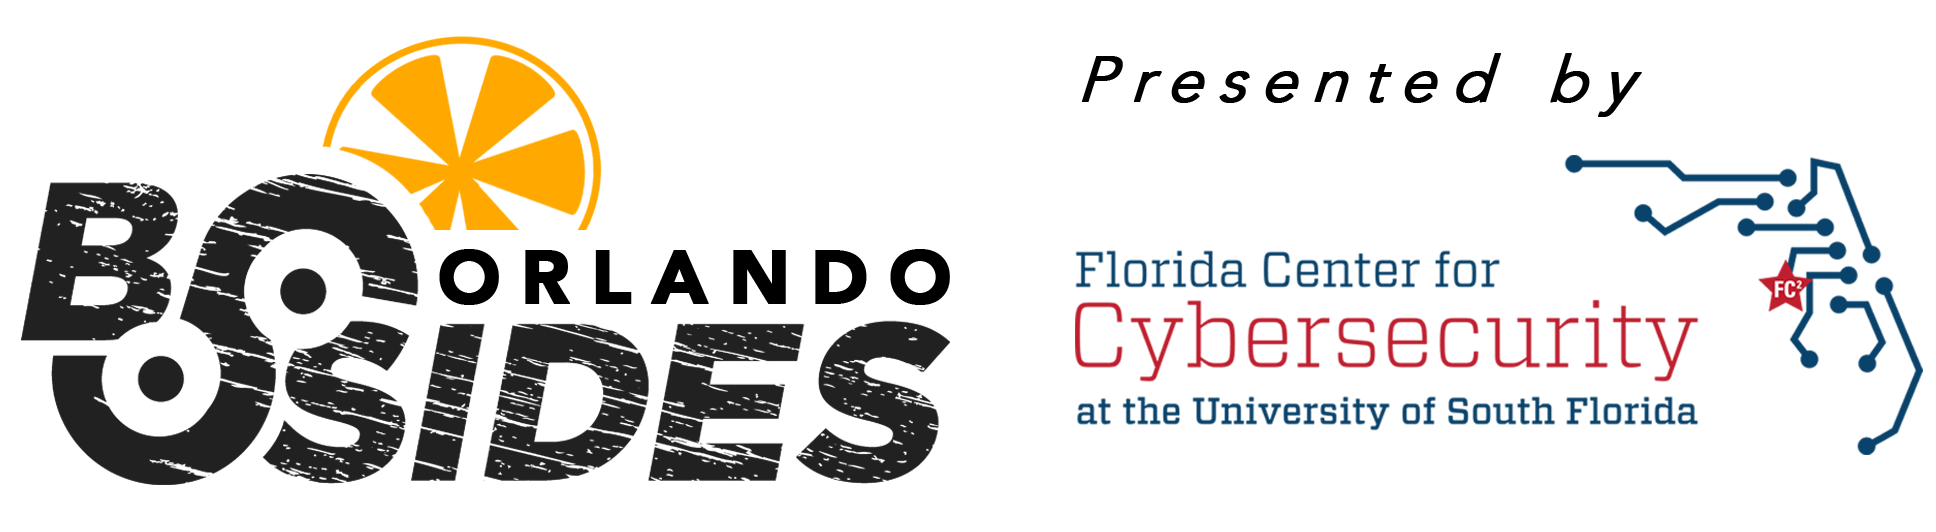 Security B-Sides Orlando 2016 Presented By FC²